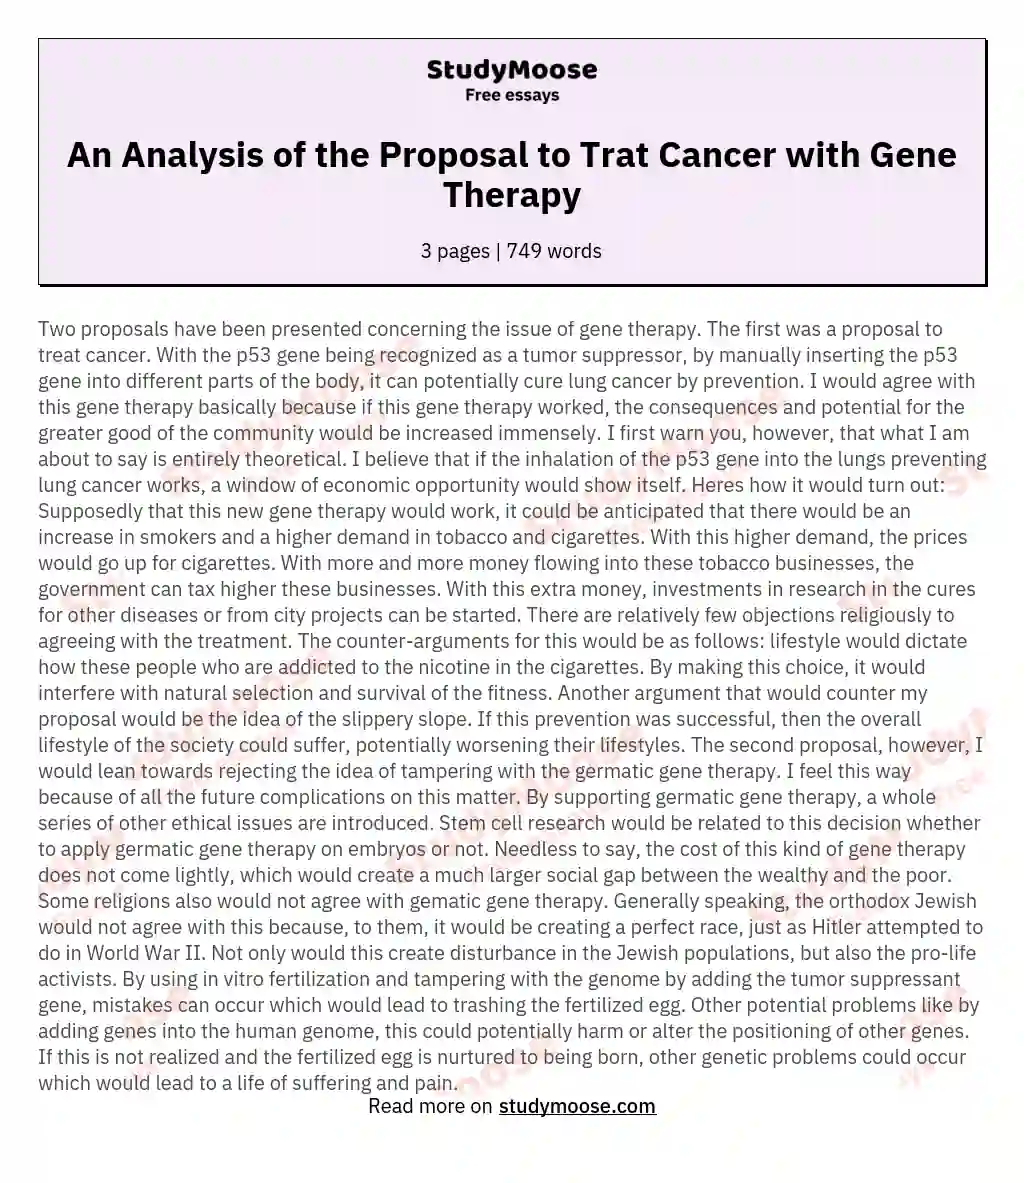 An Analysis of the Proposal to Trat Cancer with Gene Therapy essay